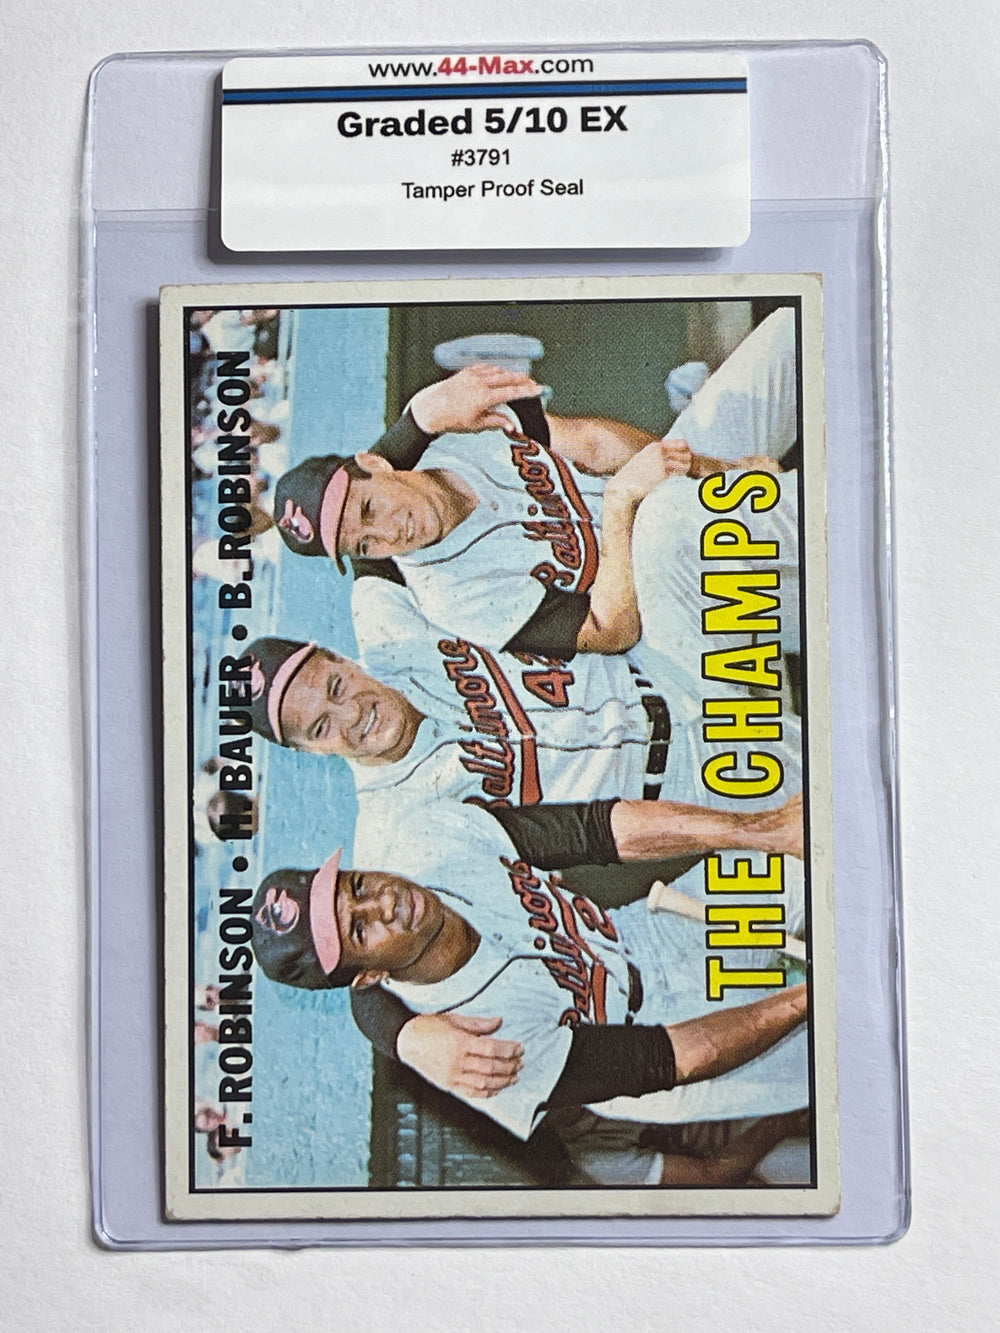 The Champs 1967 Topps Baseball #1 Card. 44-Max 5/10 EX #3791